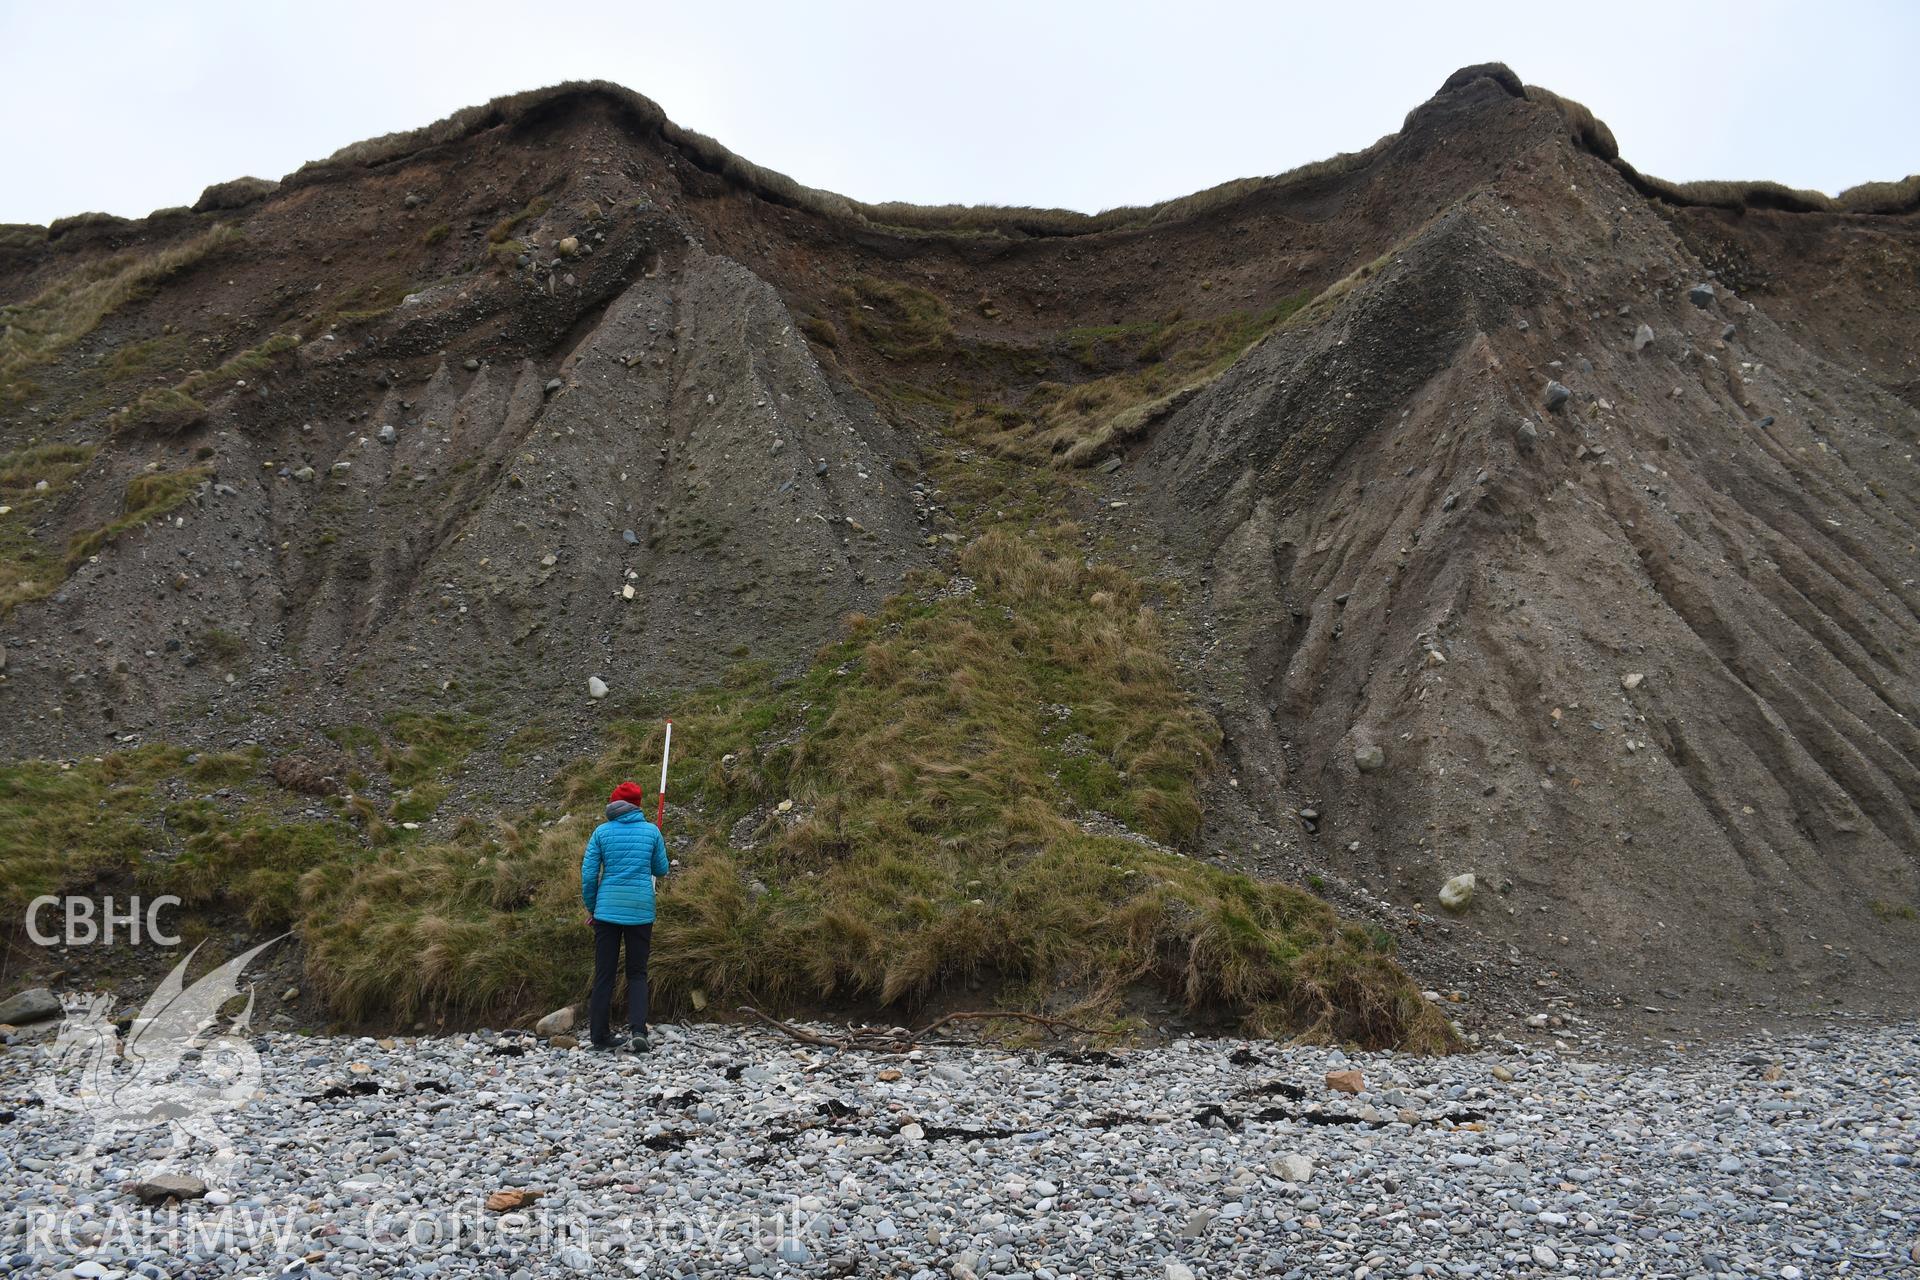 Movement of sediments and stabilisation of turf on eroding cliff face. Figure and 2m scale. Taken by Hannah Genders Boyd. Produced with EU funds through the Ireland Wales Co-operation Programme 2014-2023. All material made freely available through the Ope